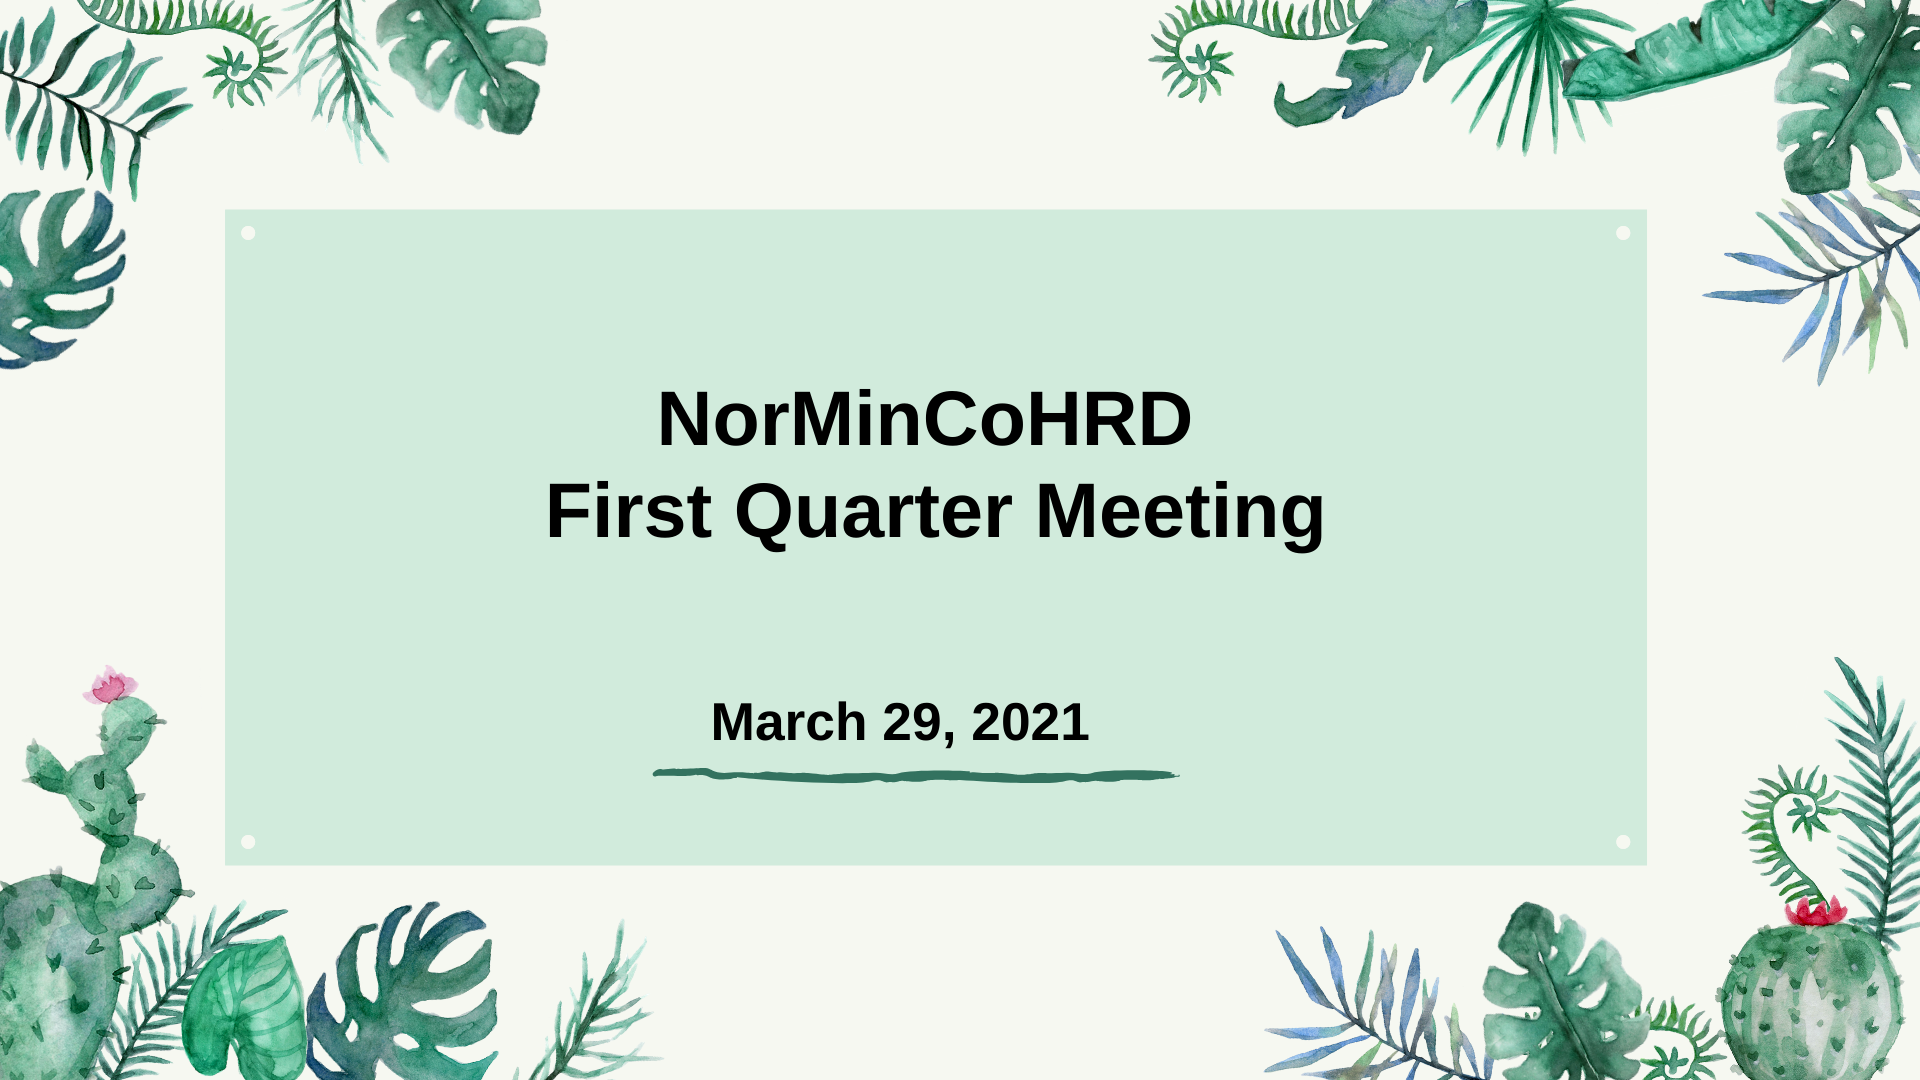 normincohrd first quarter meeting 2021